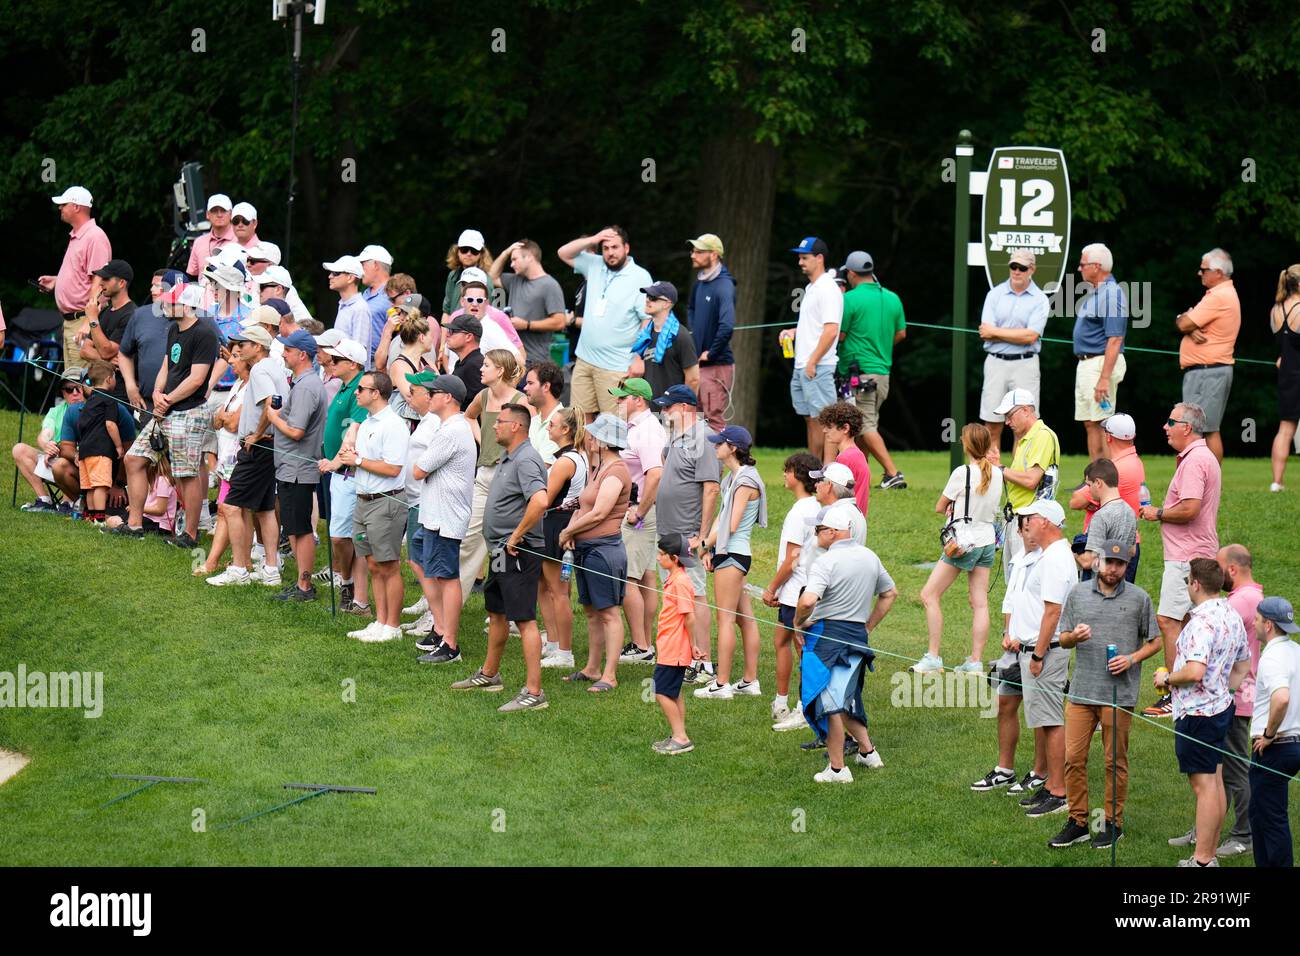 Fans watch play on the 11th green during the second round of the Travelers Championship golf tournament at TPC River Highlands, Friday, June 23, 2023, in Cromwell, Conn